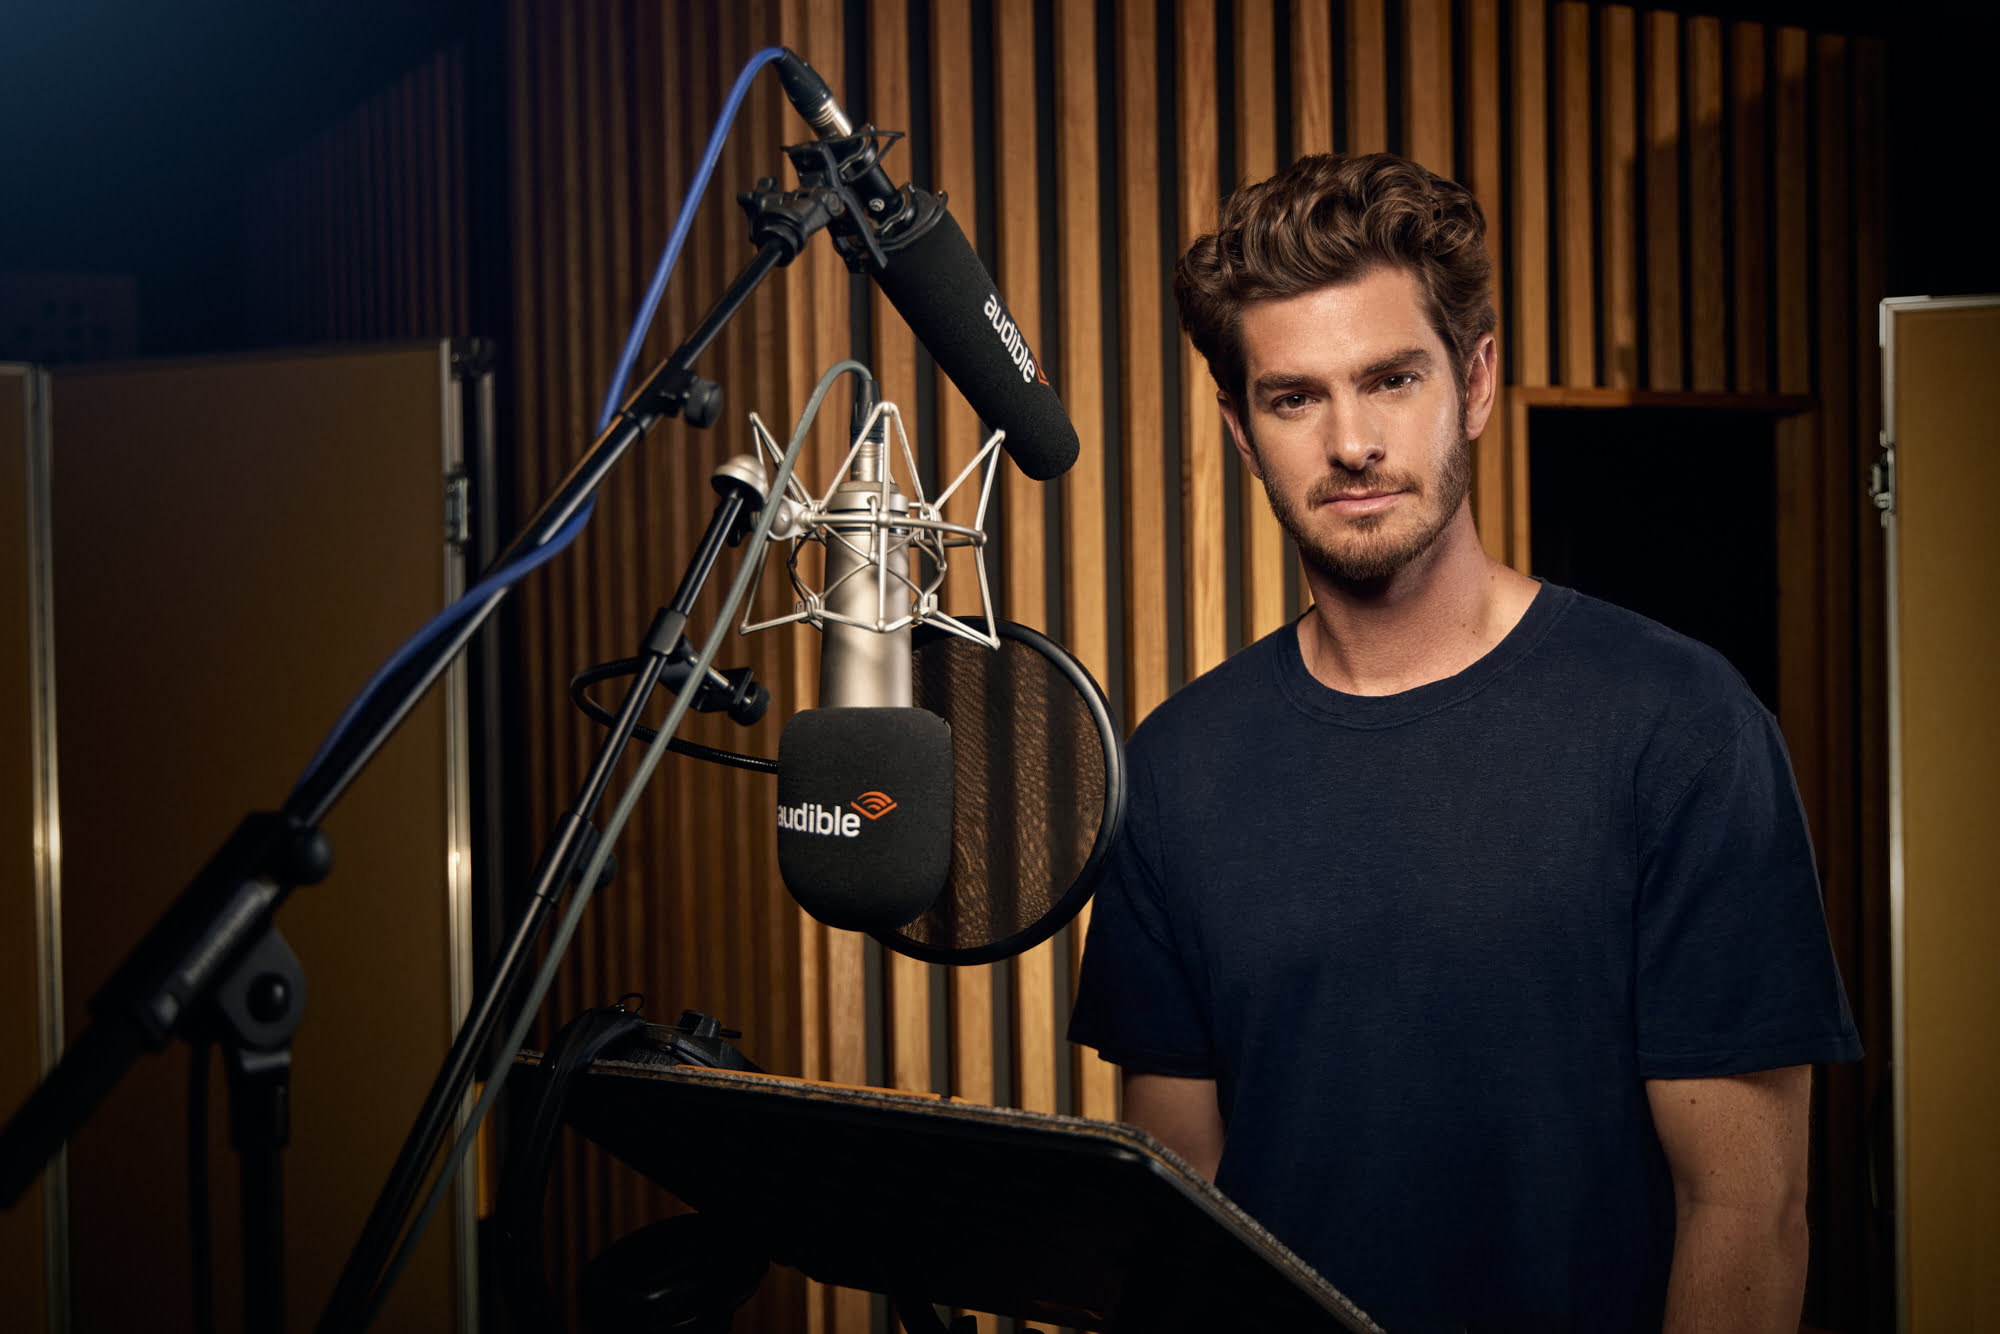 aAndrew Garfield shot shot for Audible for the forthcoming release of audio drama 1984